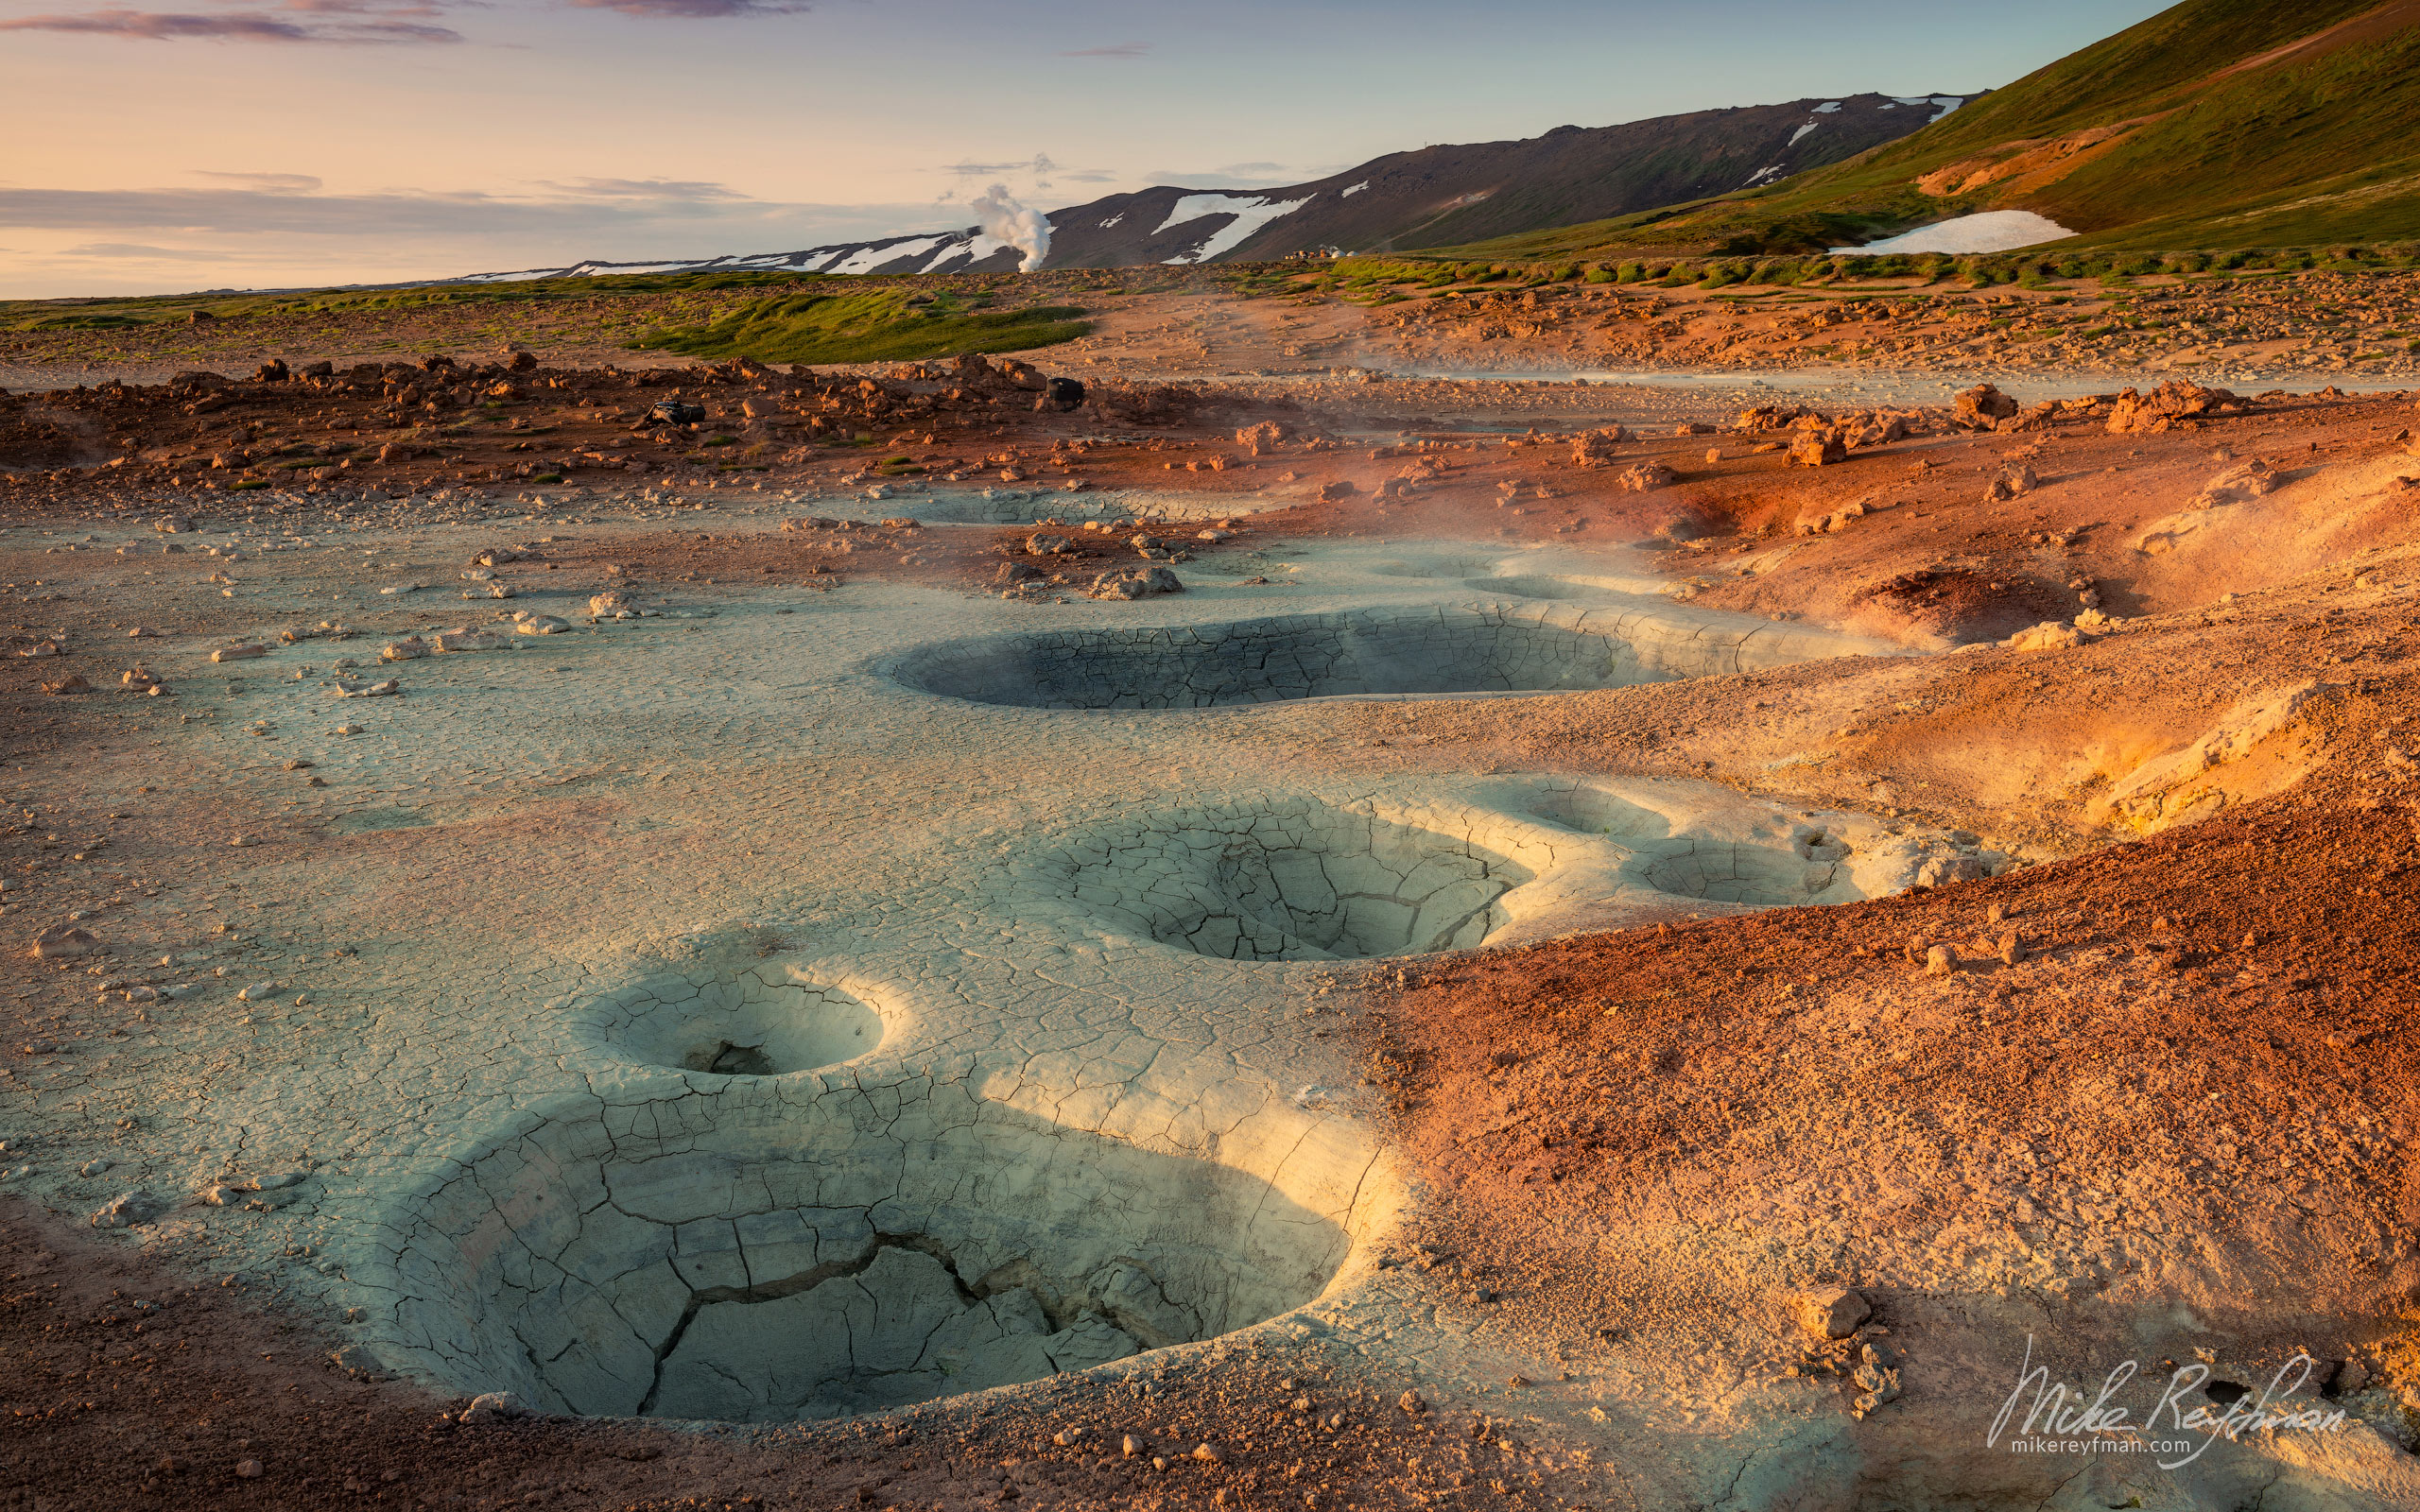 Theistareykir Geothermal Area. North Iceland. 094-IC-GP _D8B2656 - Rhyolite Mountains, Crater Lakes, Geothermal Areas, Lava Fields and Glacial Rivers. Iceland.  - Mike Reyfman Photography